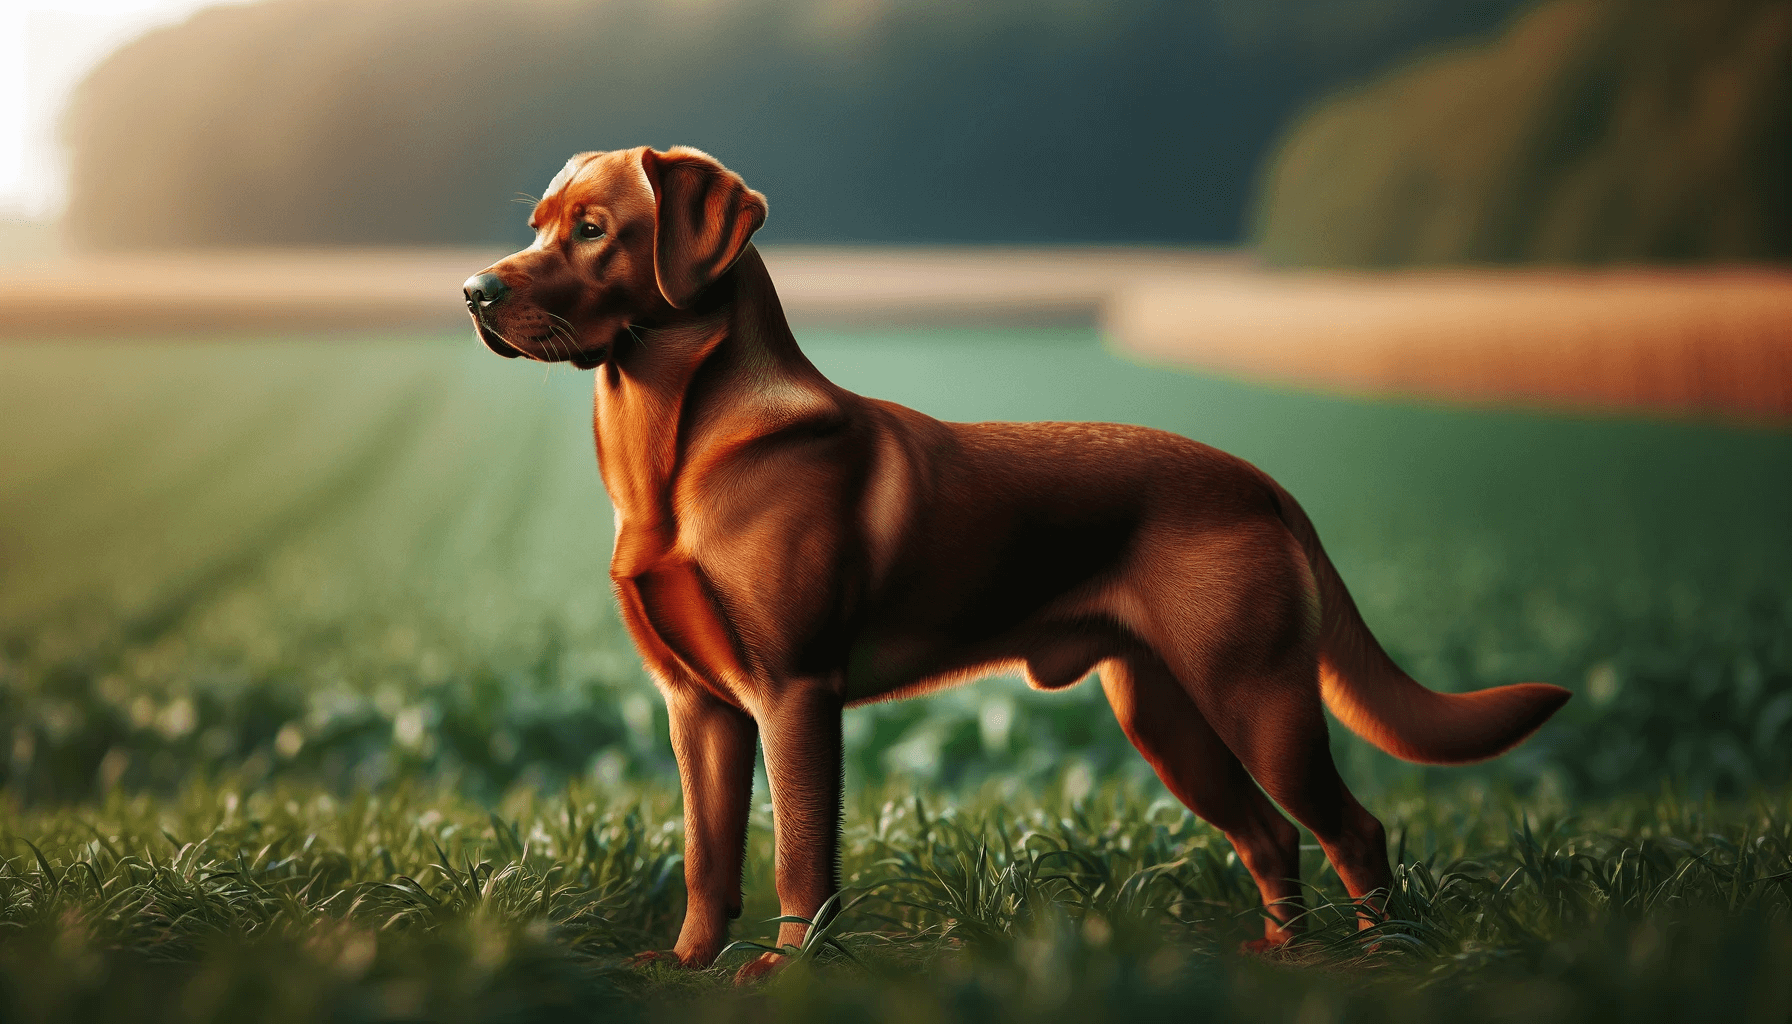 Red Fox Labrador retriever standing in a field with its full body visible in a 16:9 aspect ratio, captured in profile